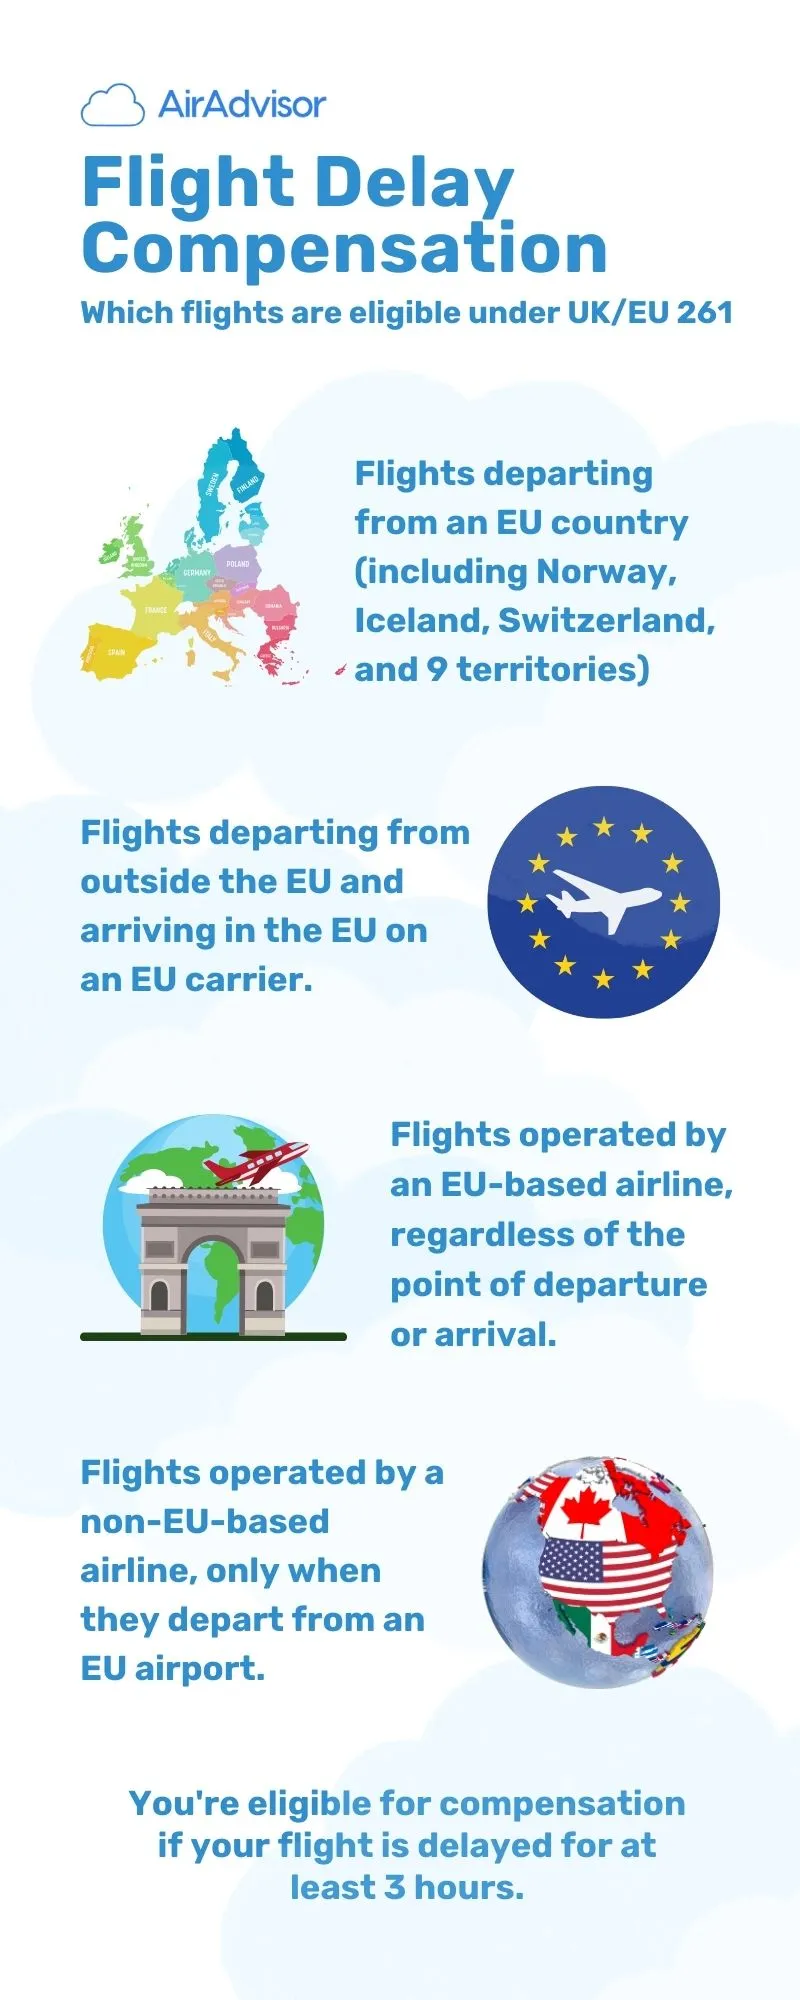 What Flights are Covered under UK/EU 261